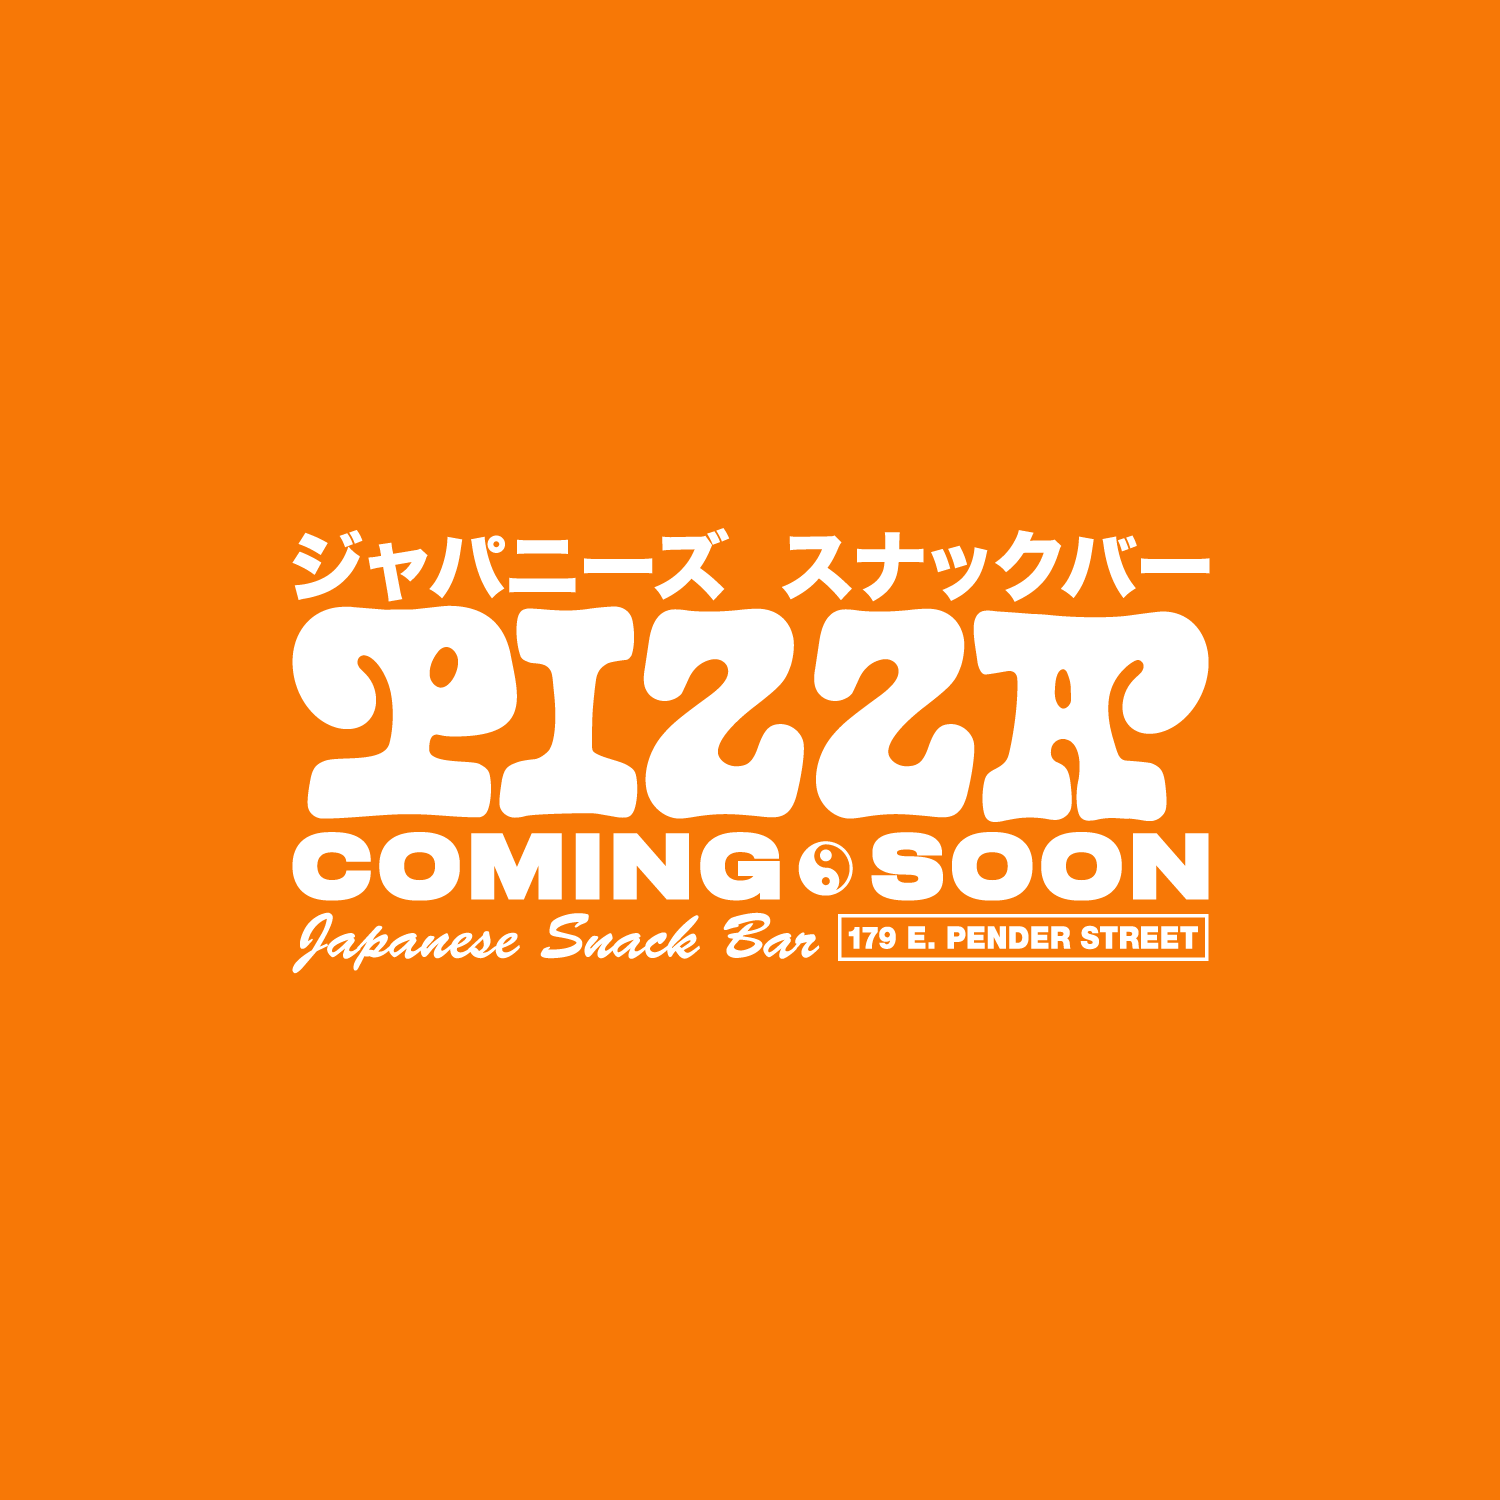 Pizzacomingsoon